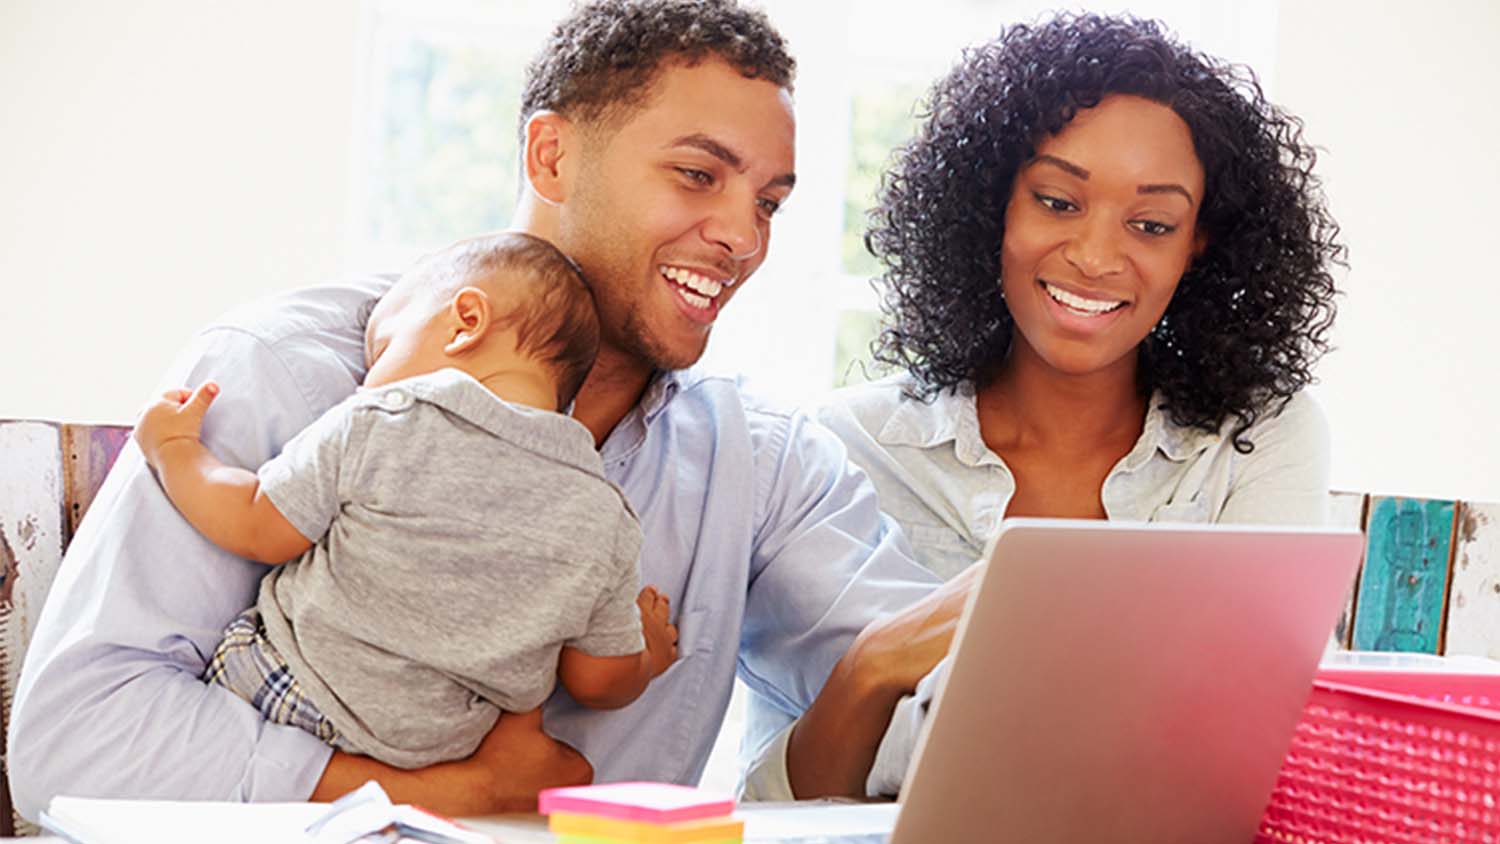 Parents holding a baby looking at a laptop